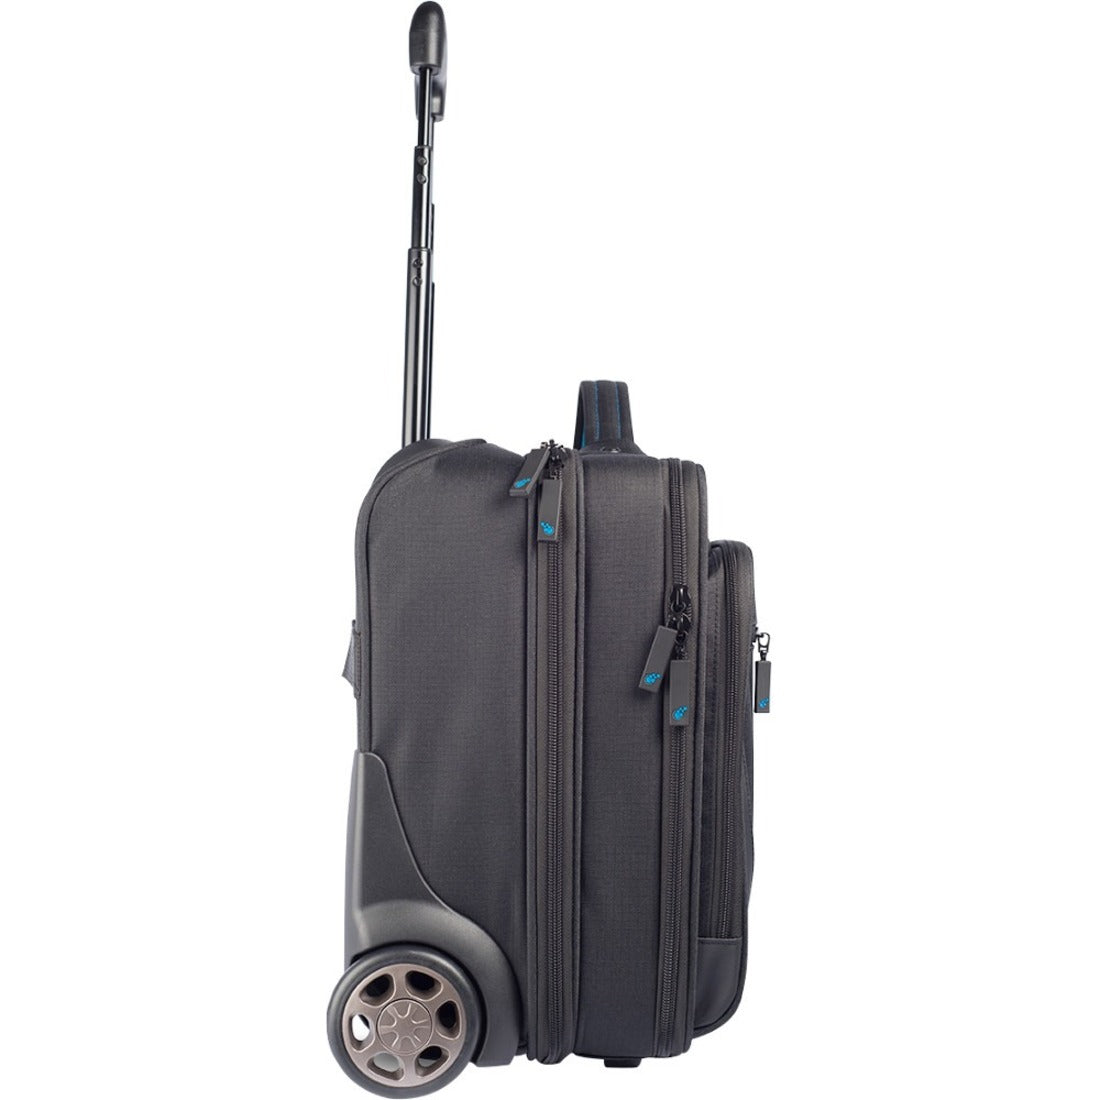 TechProducts360 Essential Carrying Case (Roller) for 17" Notebook - Black